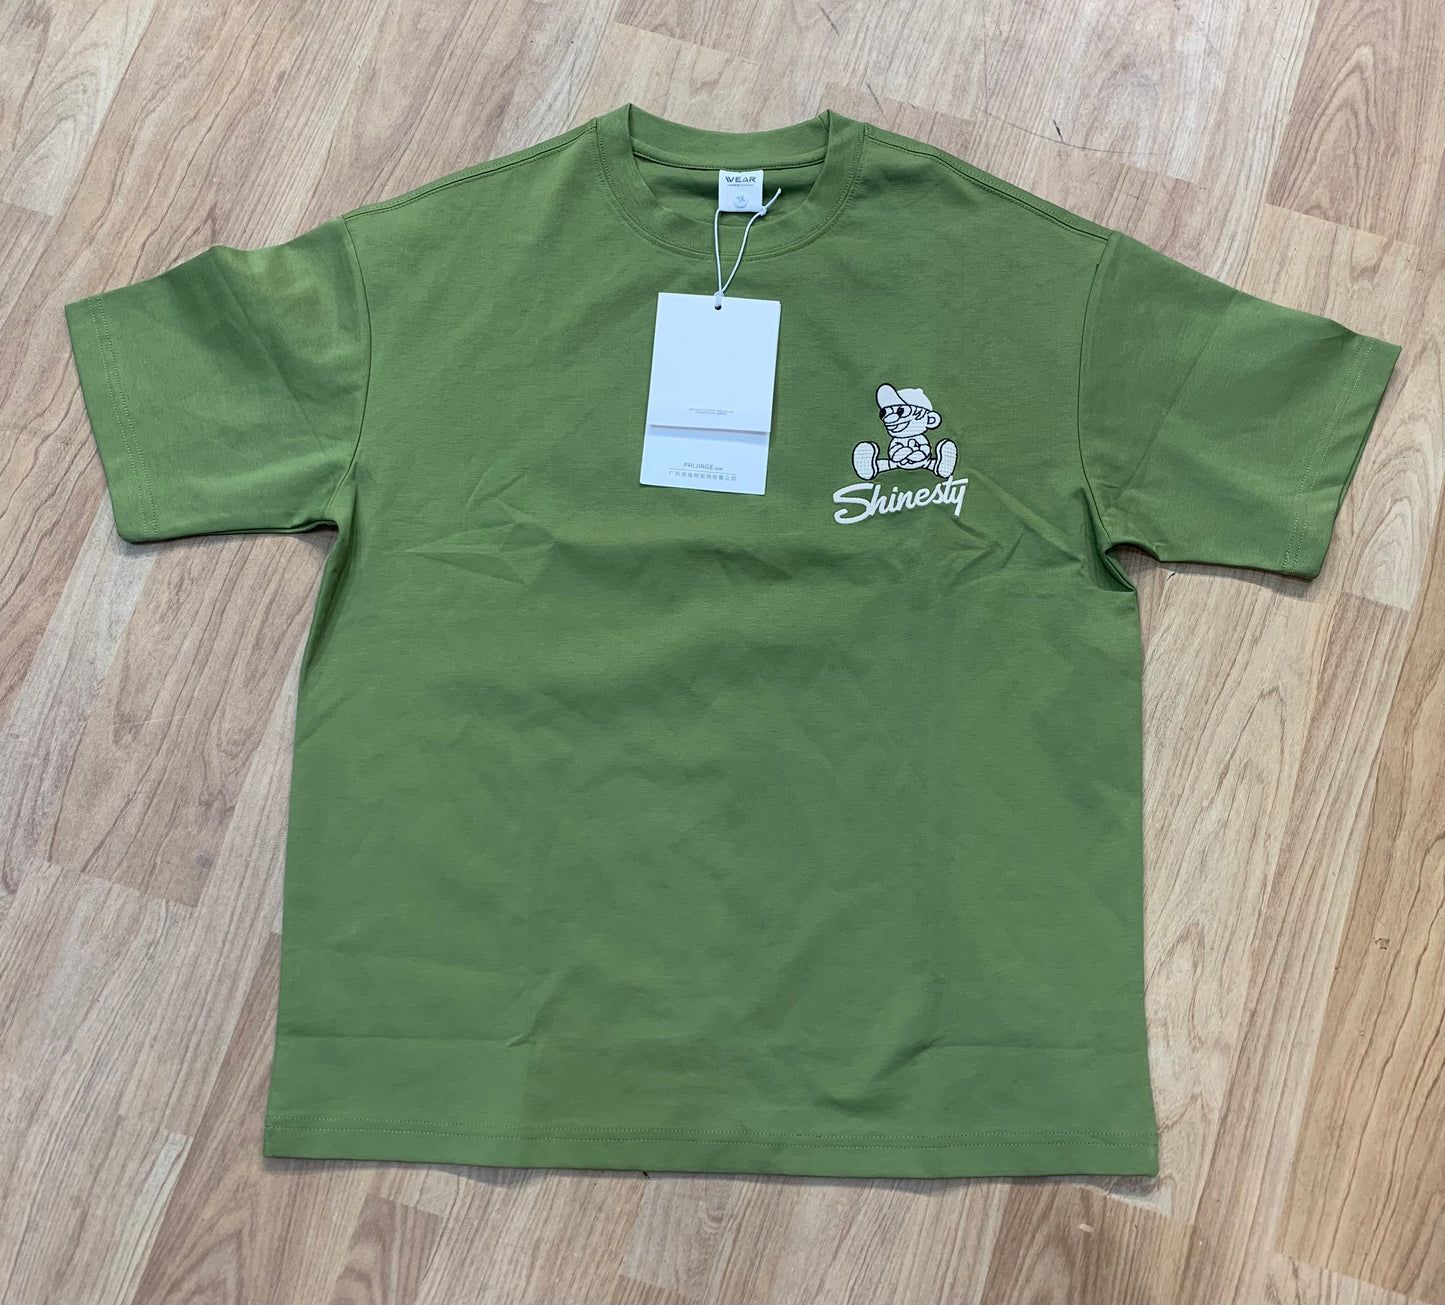 Wear Olive Green Colour With Back Print Premium Quality Oversized Tshirt 8321